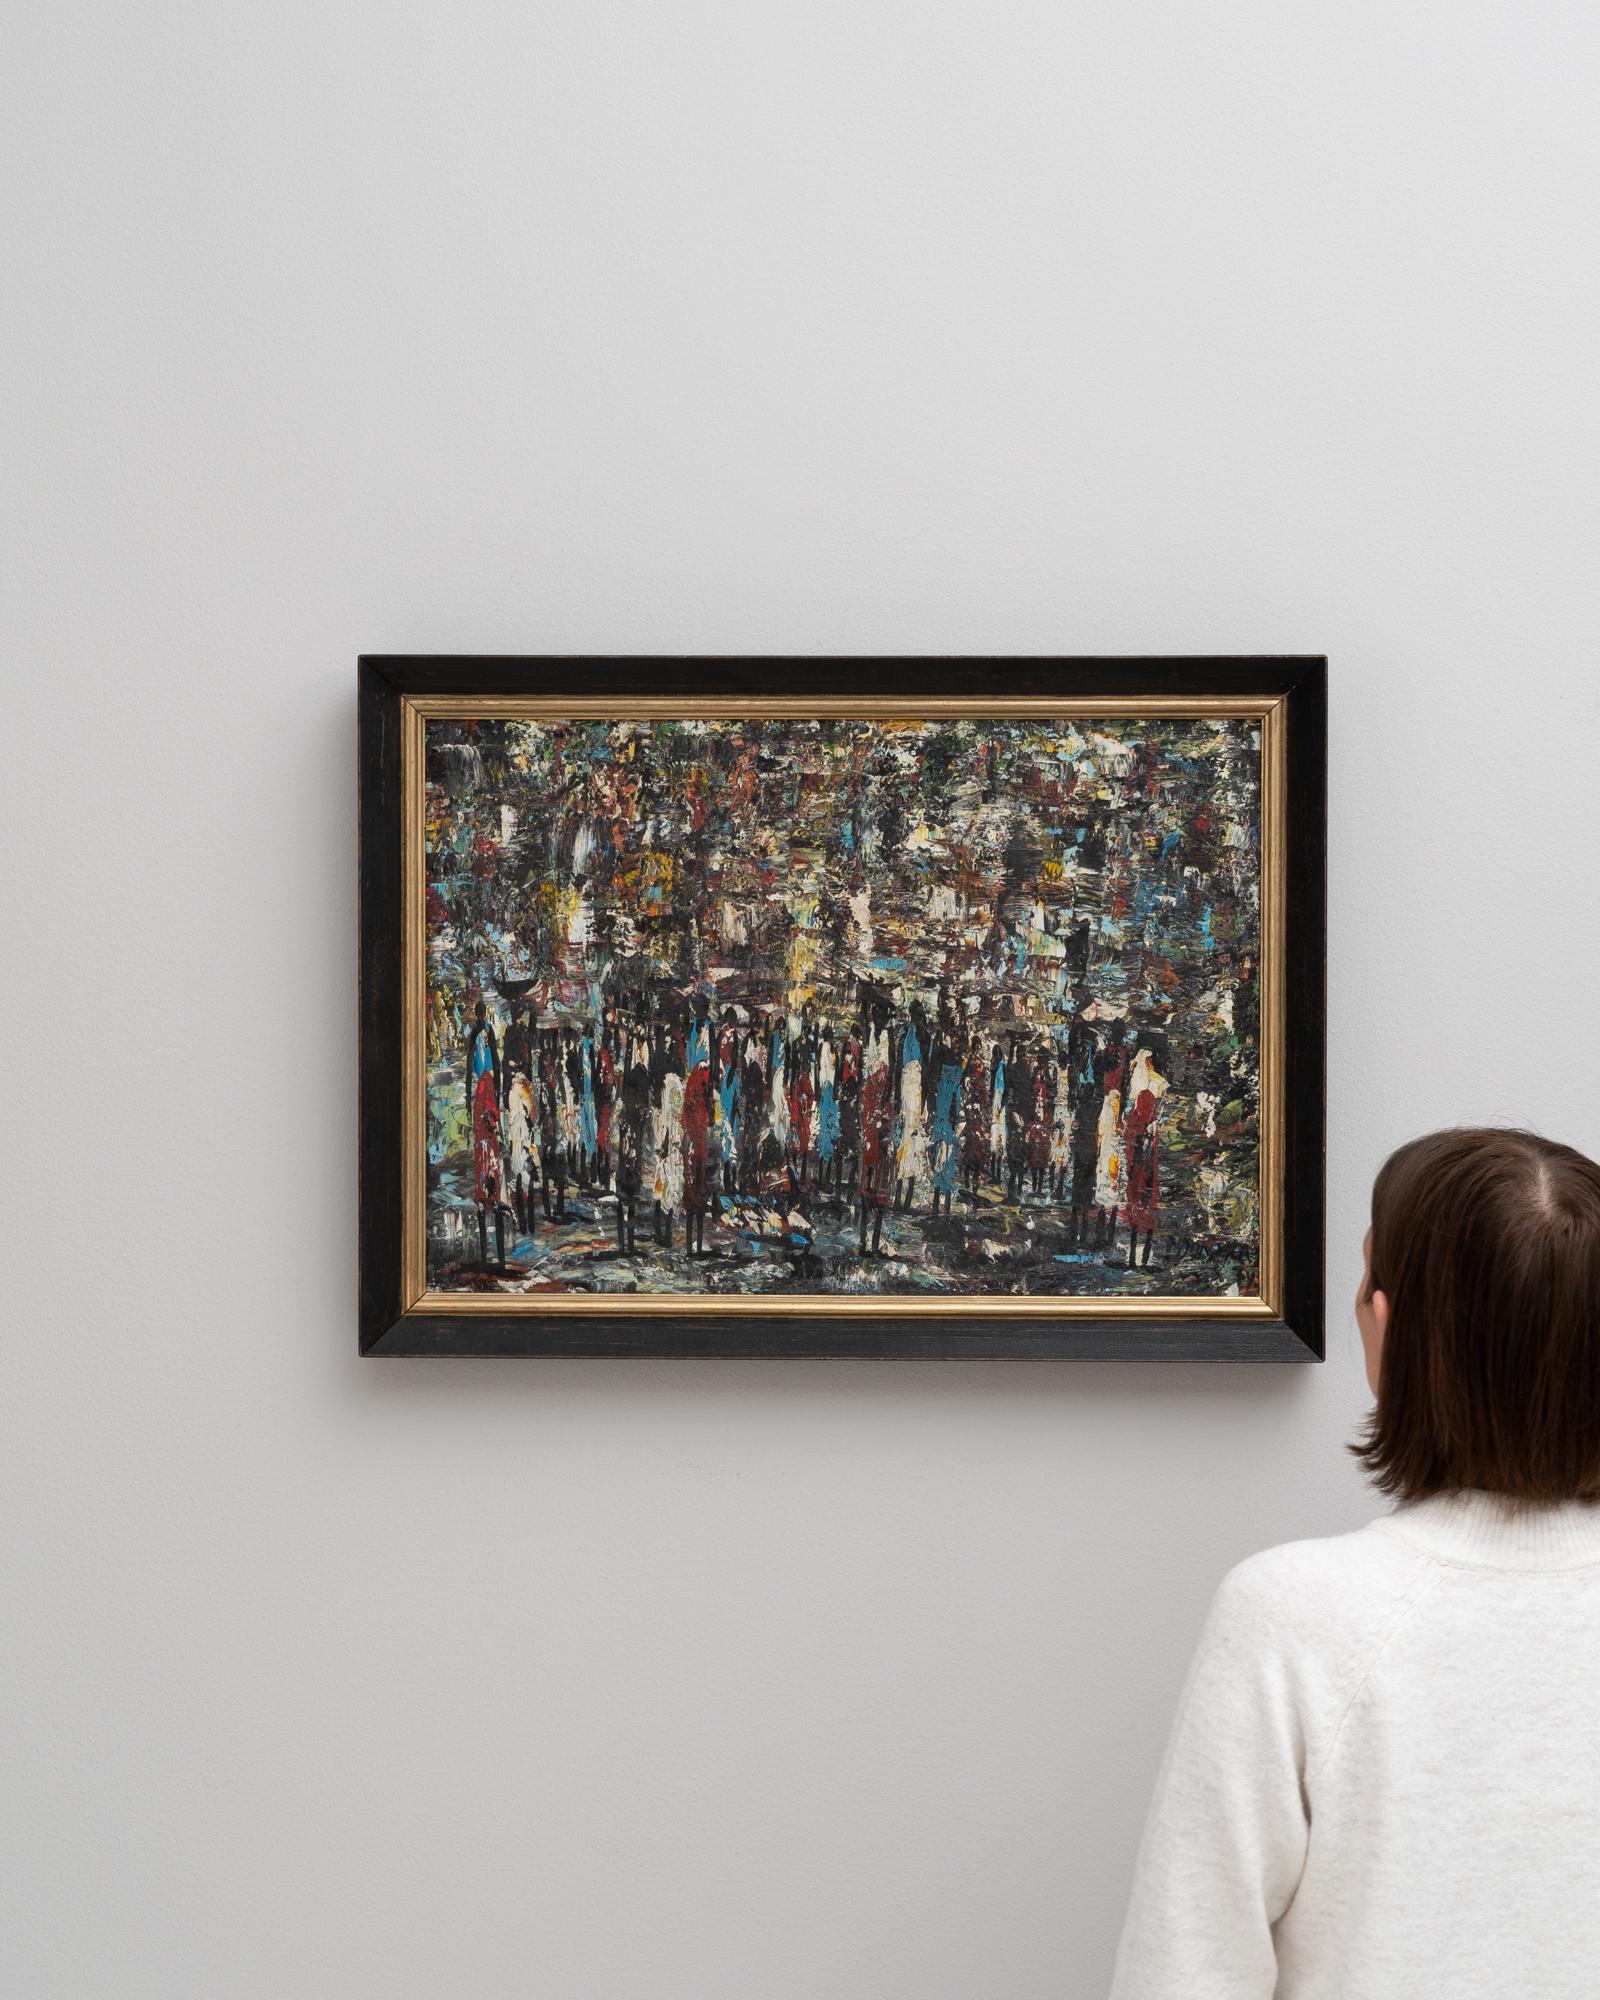 This 20th Century French painting is a vivid and dynamic composition that captures the vibrant essence of a bustling crowd. The abstract style teems with activity, as each stroke and dab of color comes together to suggest figures in motion. The